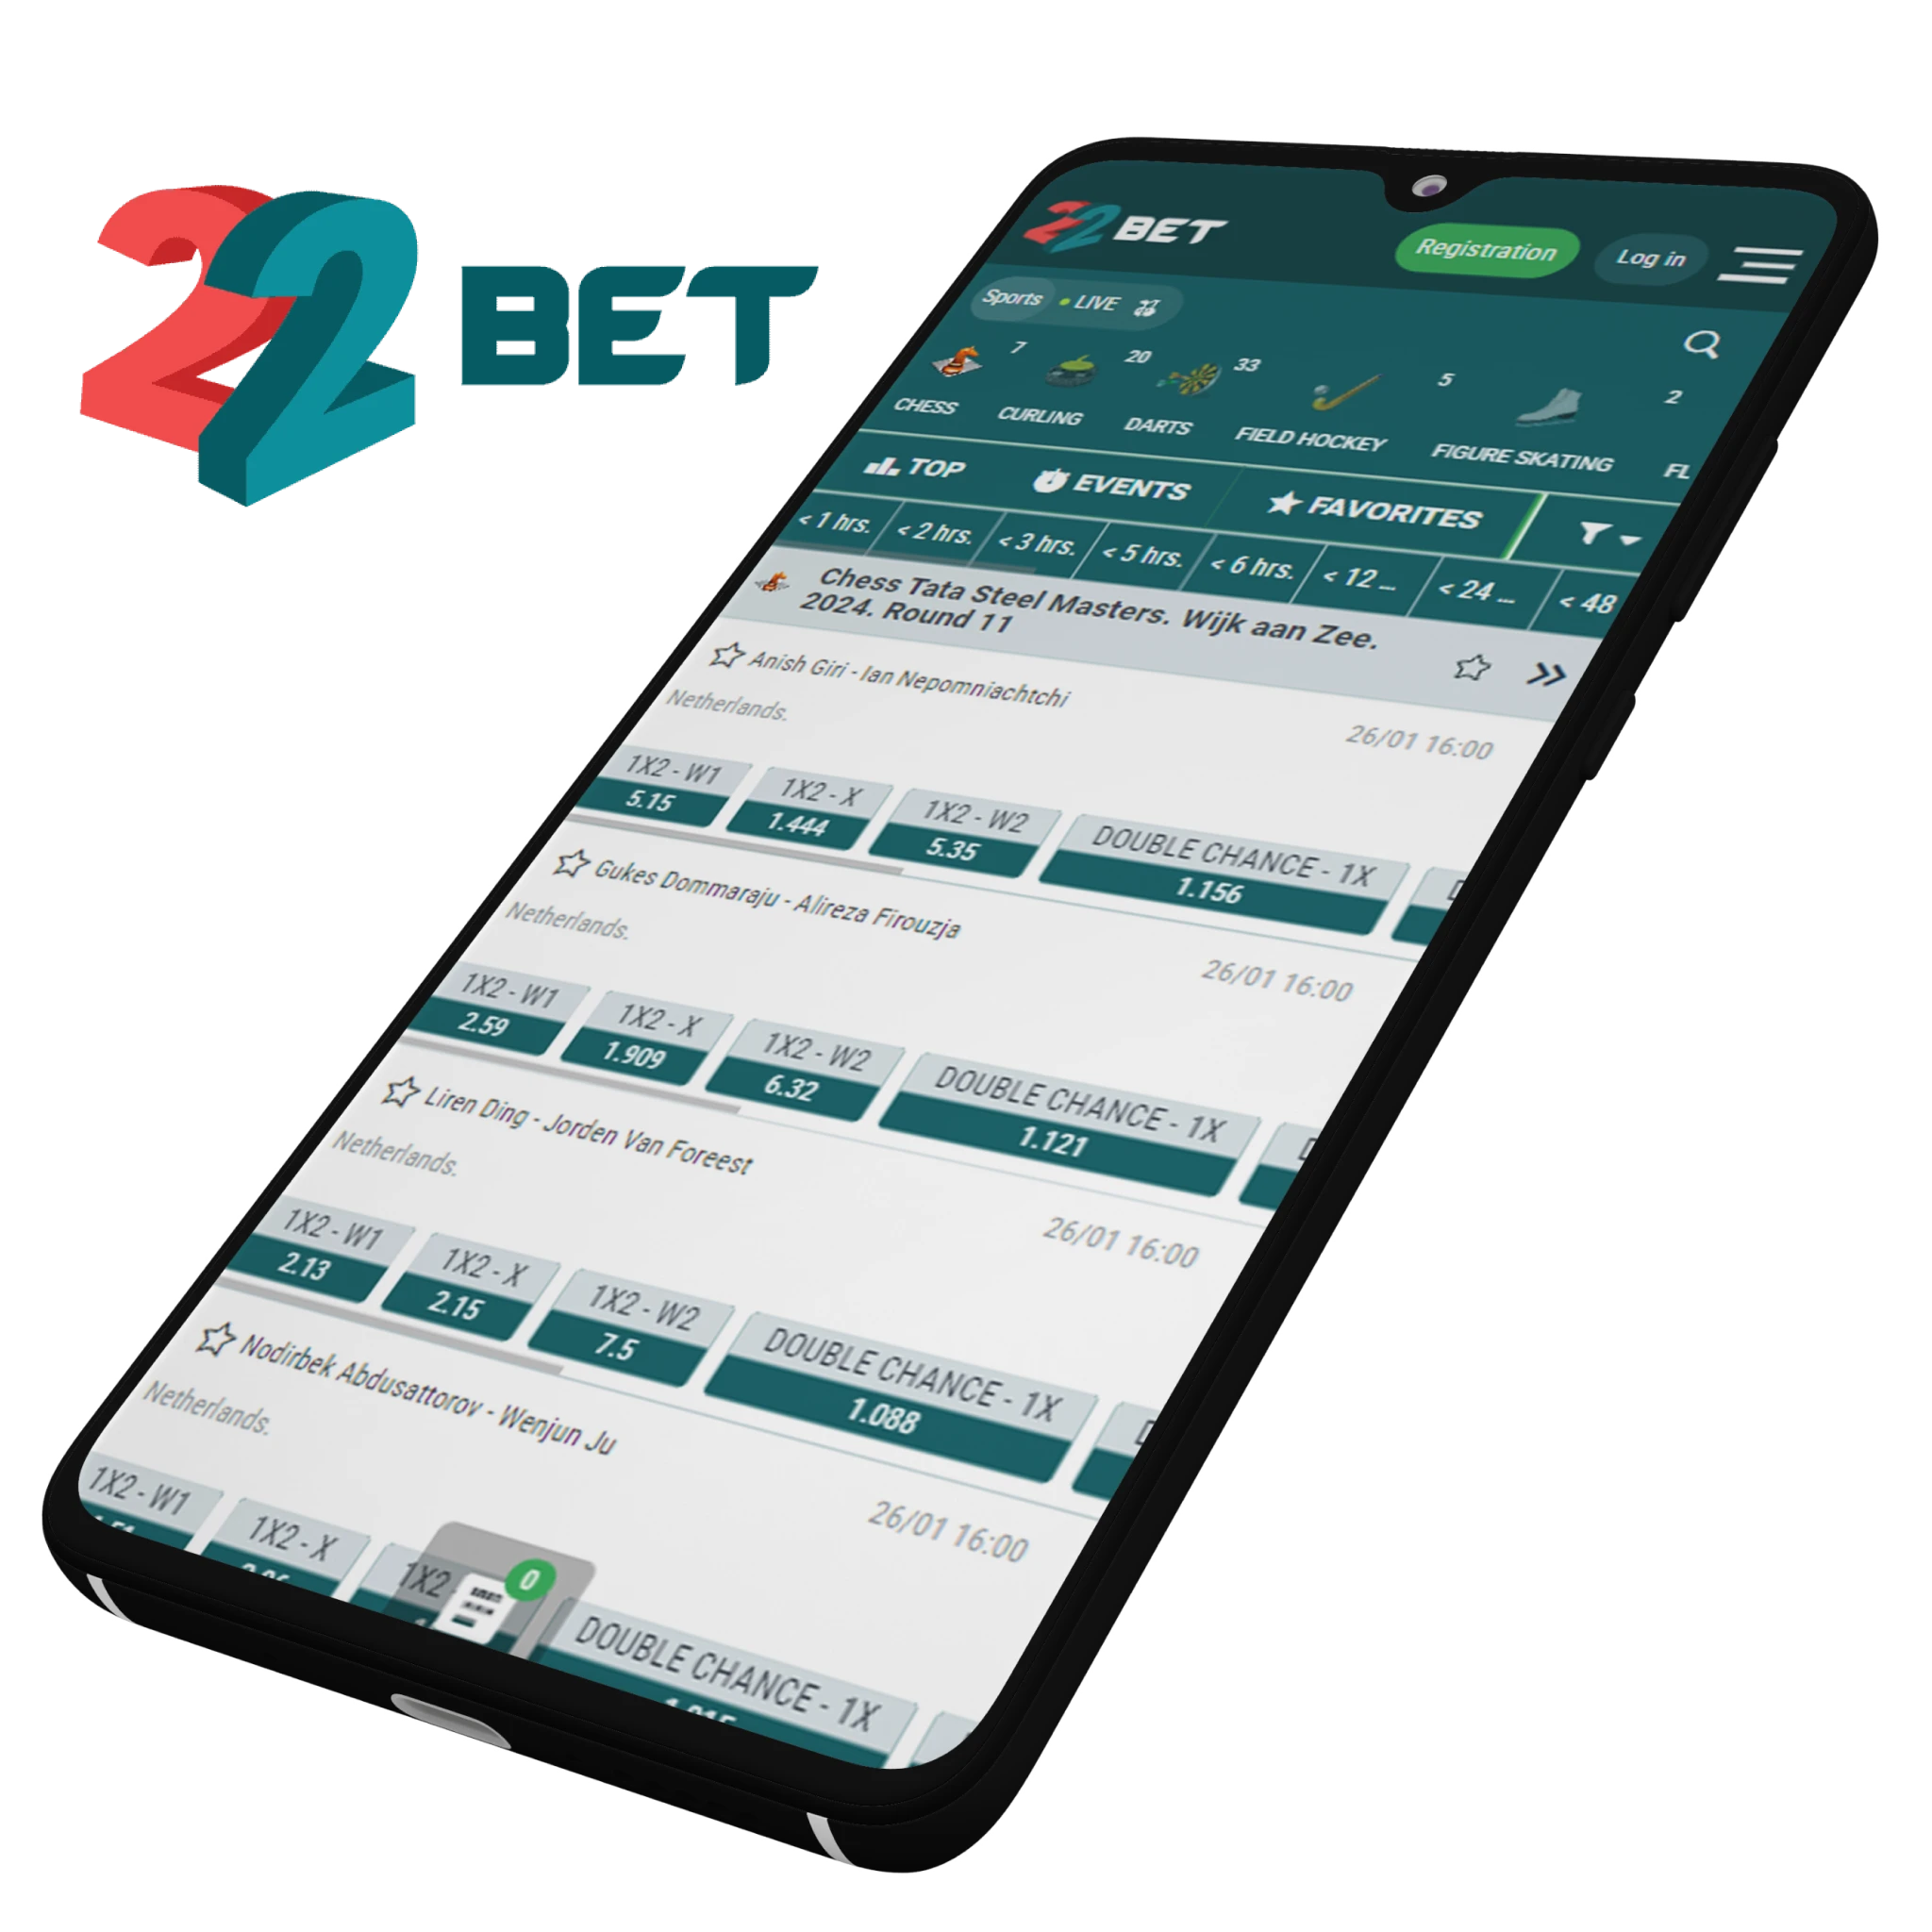 22bet mobile app has the highest welcome bonuses for chess betting.